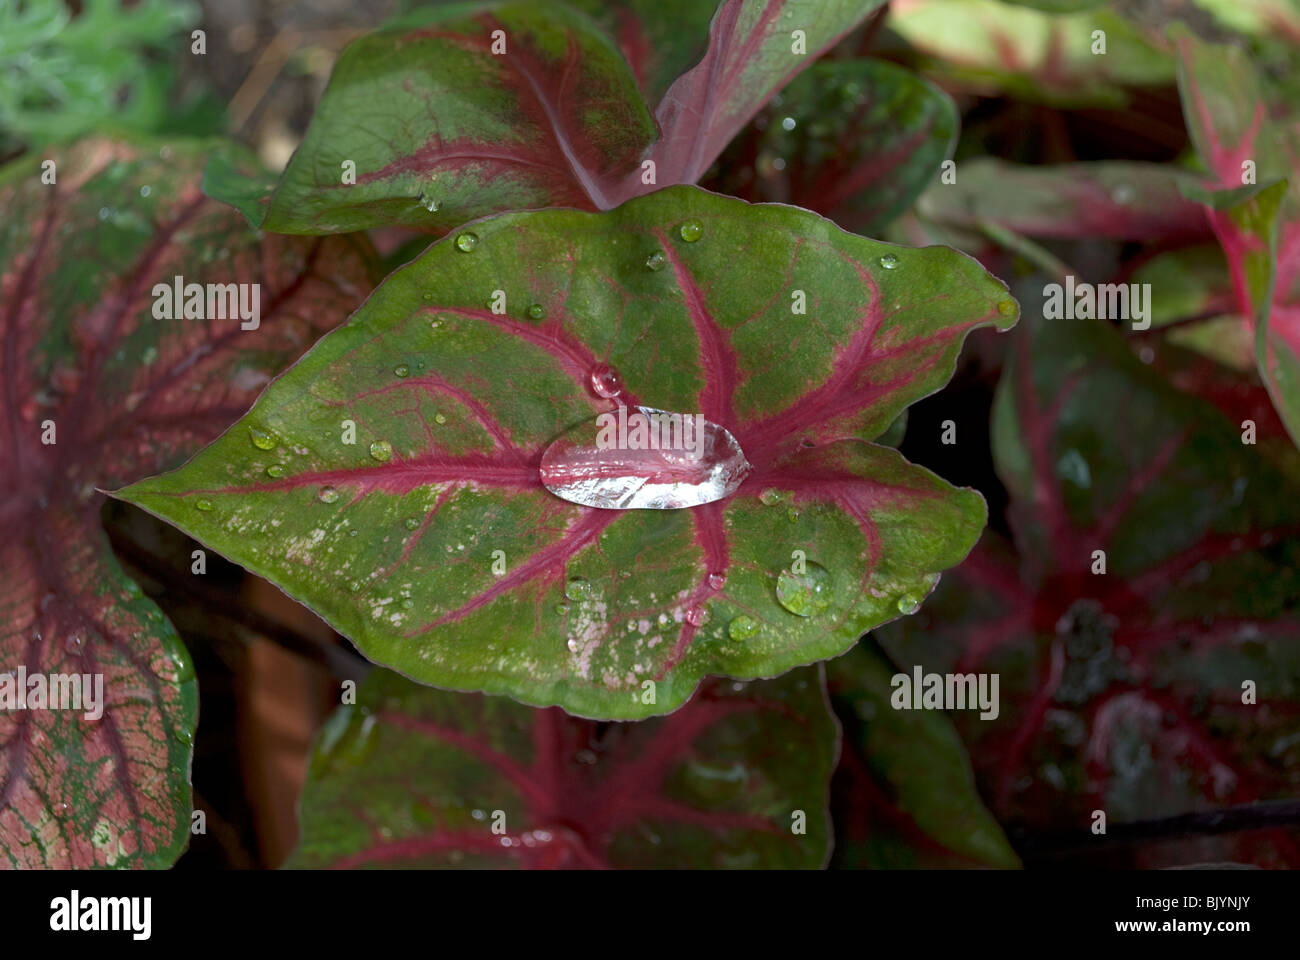 Caladium (Caladium bicolor) leaf from a home garden with trapped water droplets. Stock Photo